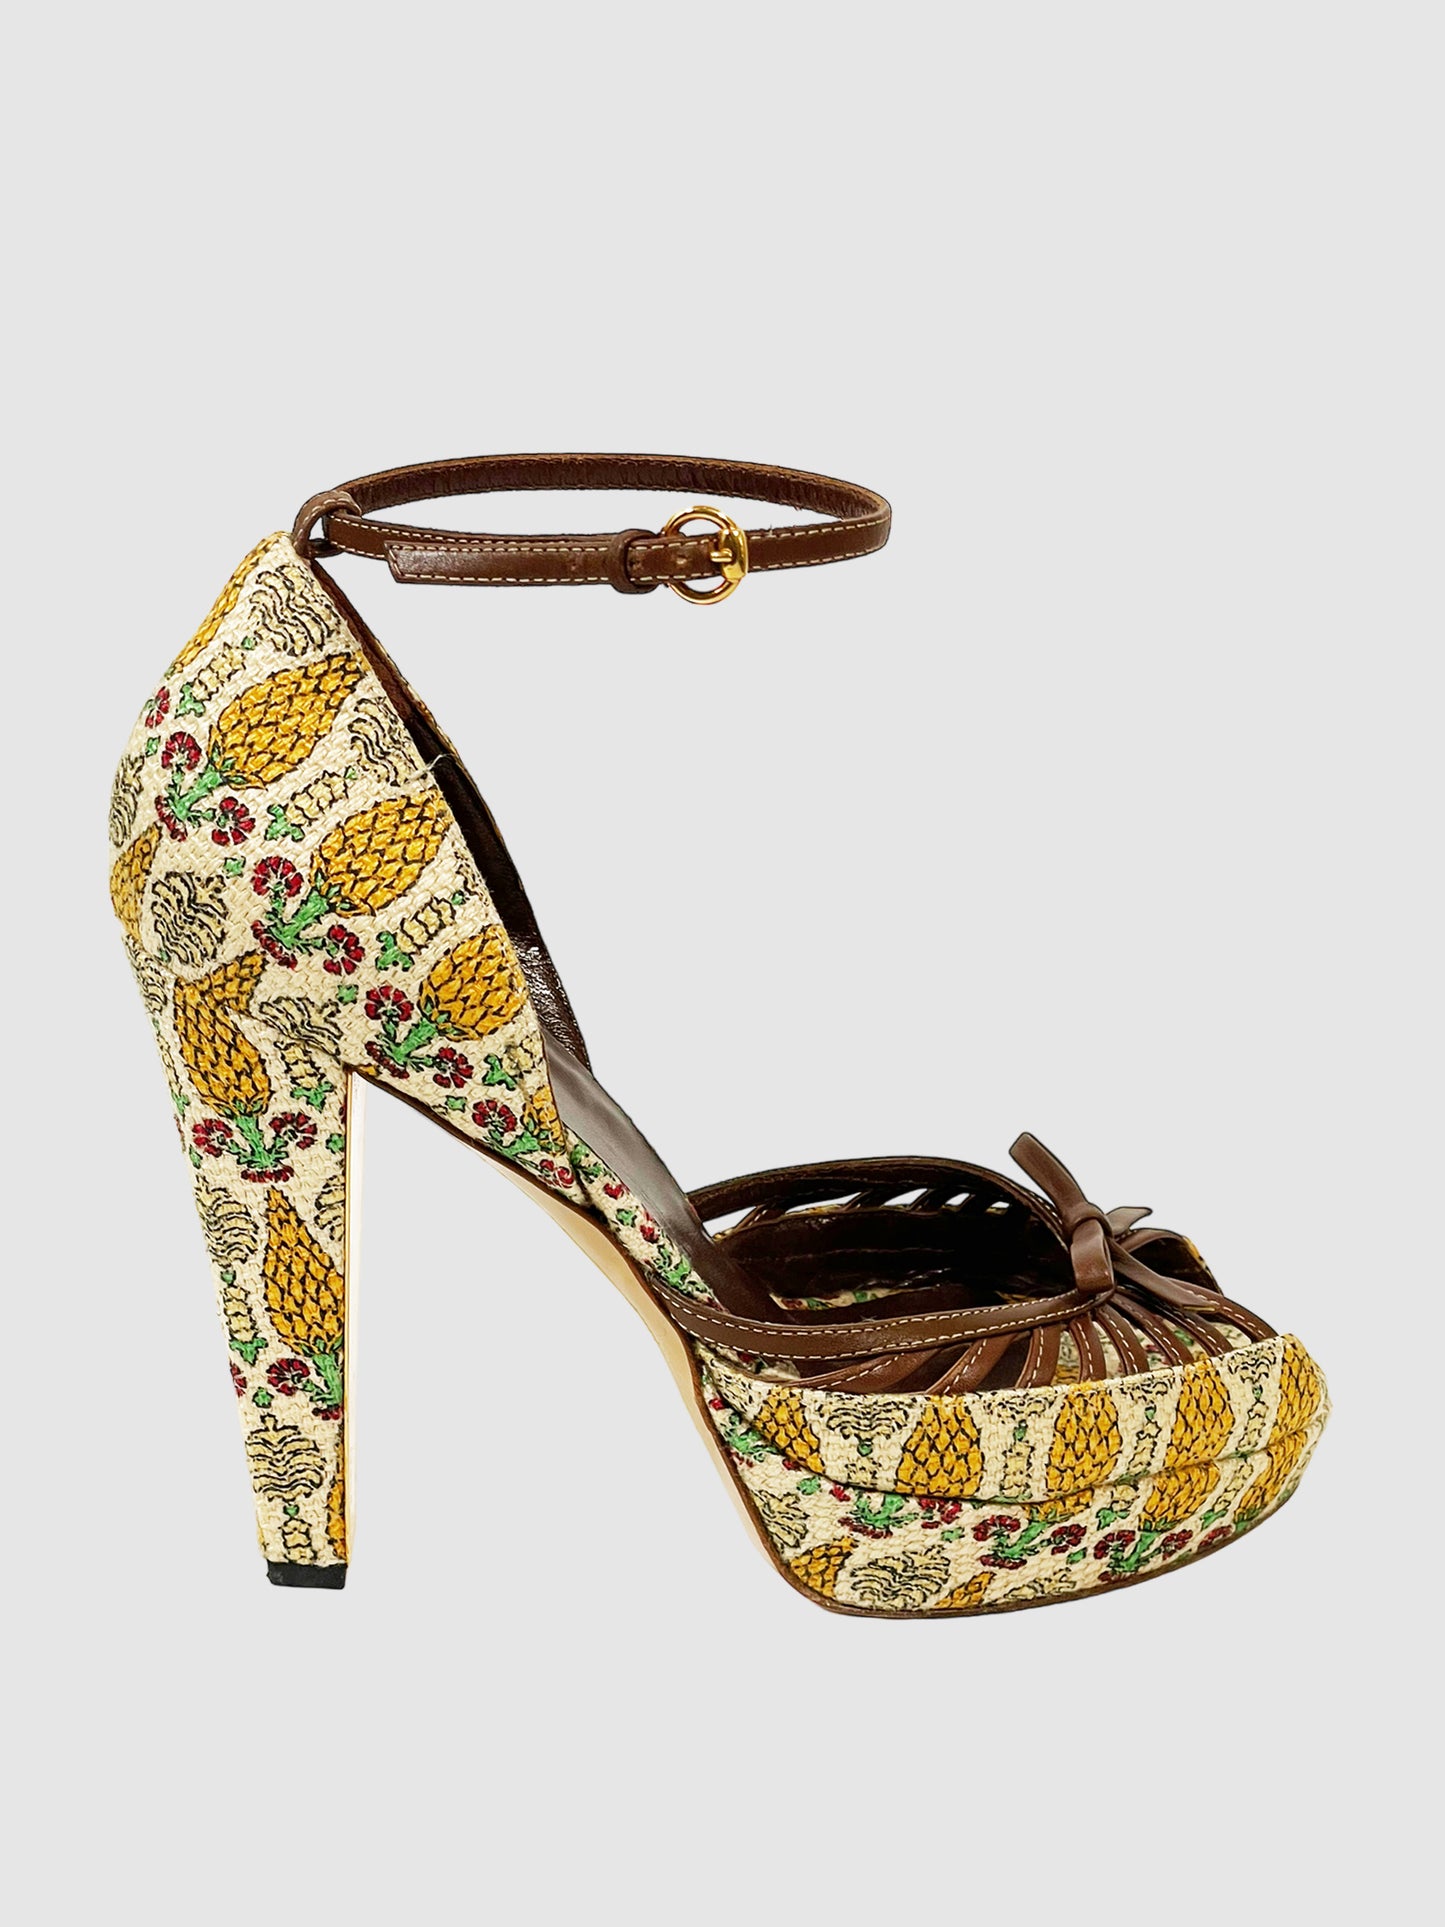 Gucci Printed Sandals - Size 37.5